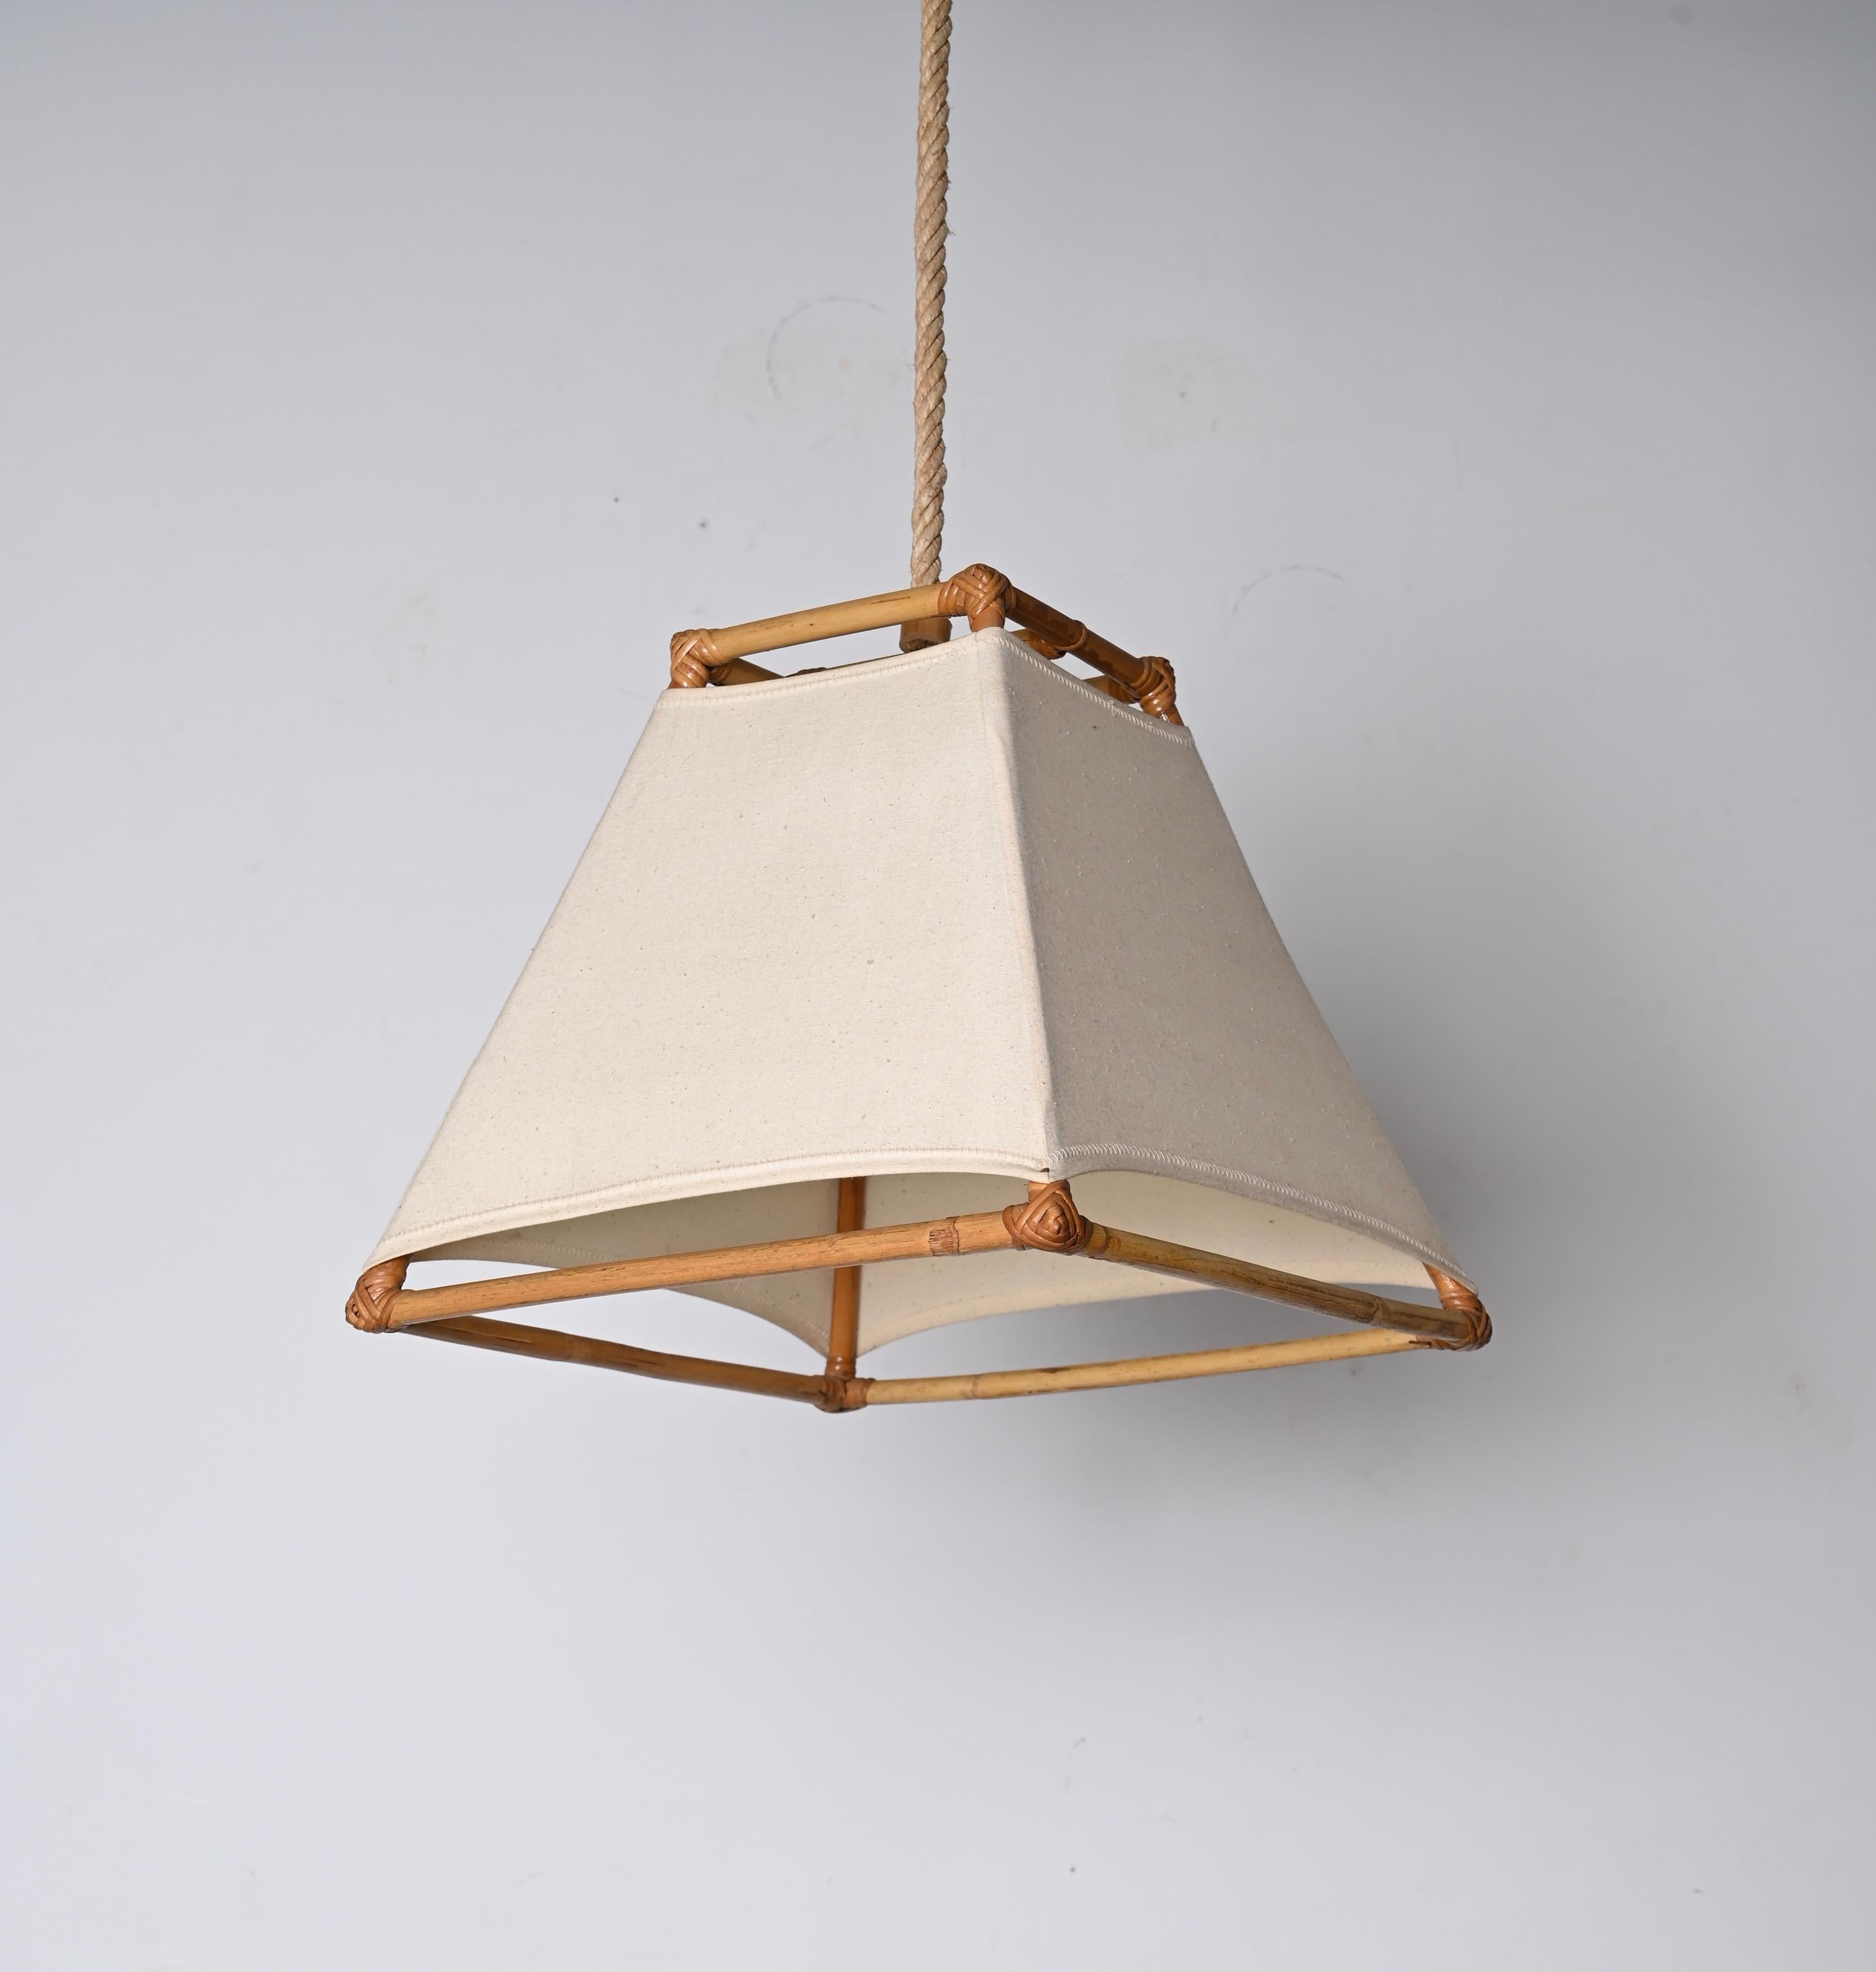 Stunning mid-century bamboo and rattan chandelier with white cream fabric and hemp rope. Louis Sognot probably designed this lovely piece in France during the 1960s.

This item is a crystalline example of midcentury French craftsmanship, with bamboo